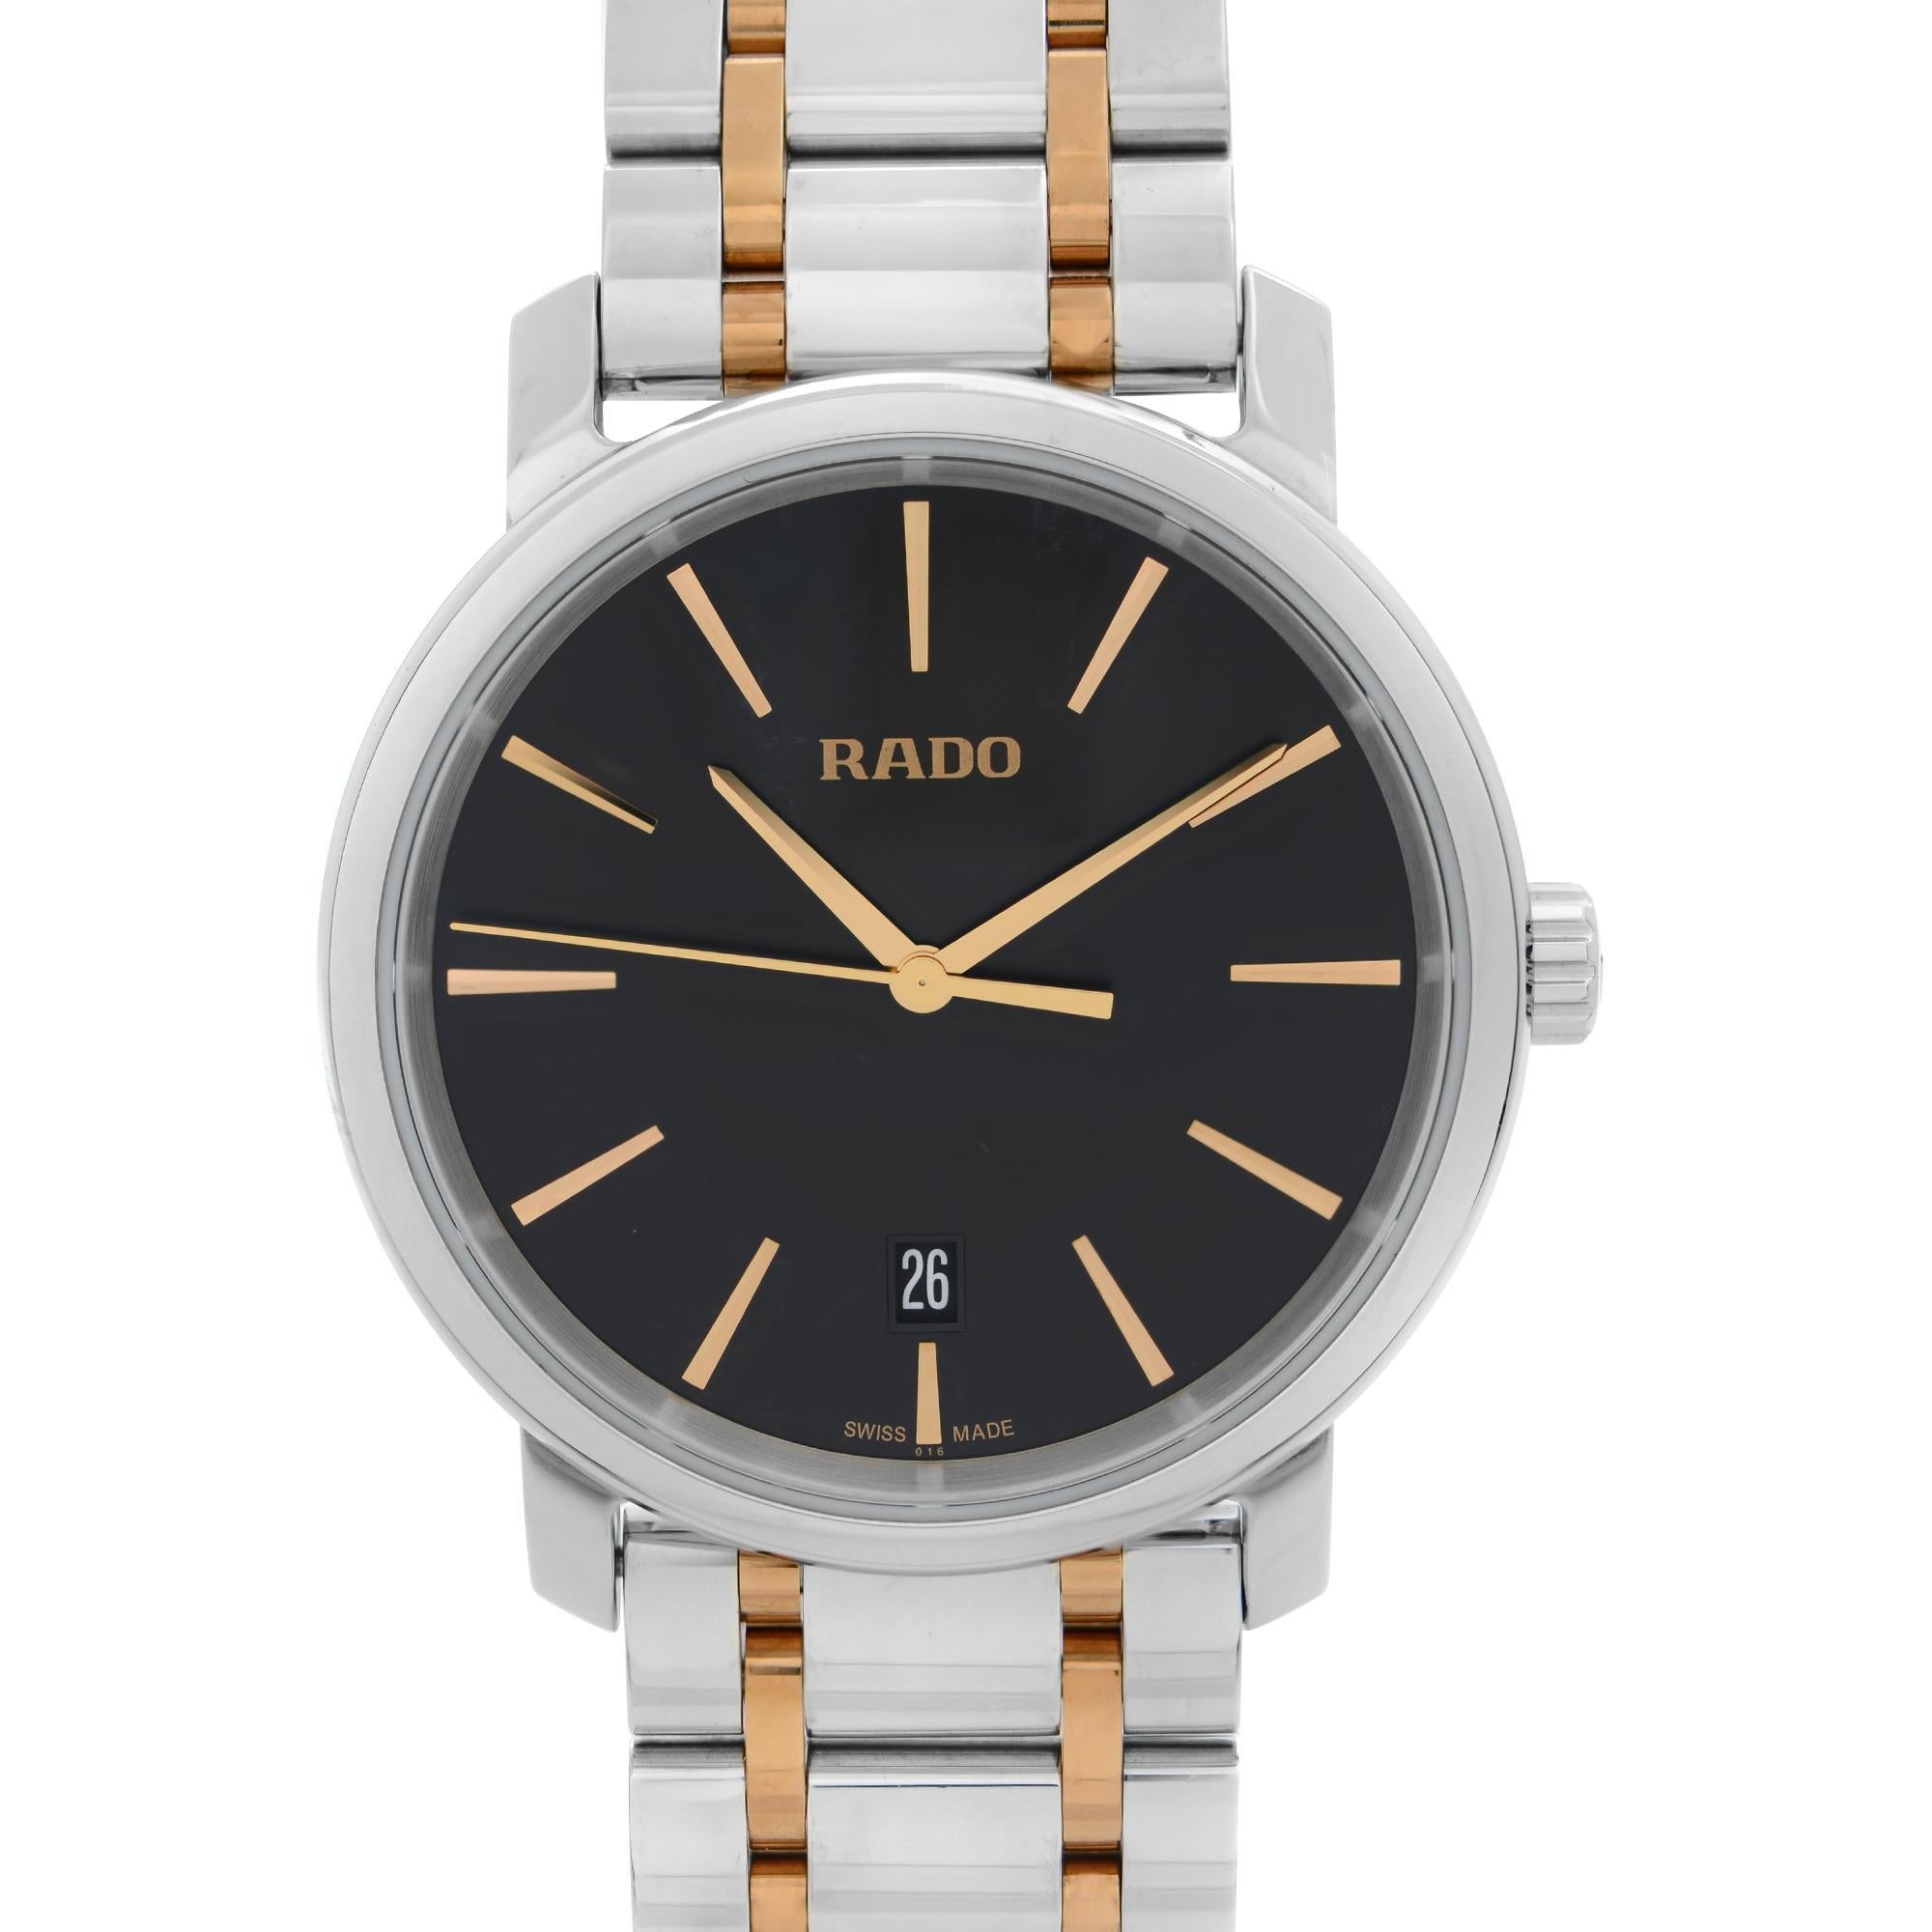 Unworn Rado DiaMaster Quartz Men's Watch R14078163. This Beautiful Timepiece is Powered by a Quartz (Battery) Movement and Features: Stainless Steel Case with a Two-Tone Stainless Steel Bracelet, Fixed Stainless Steel Bezel. Black Dial with Rose